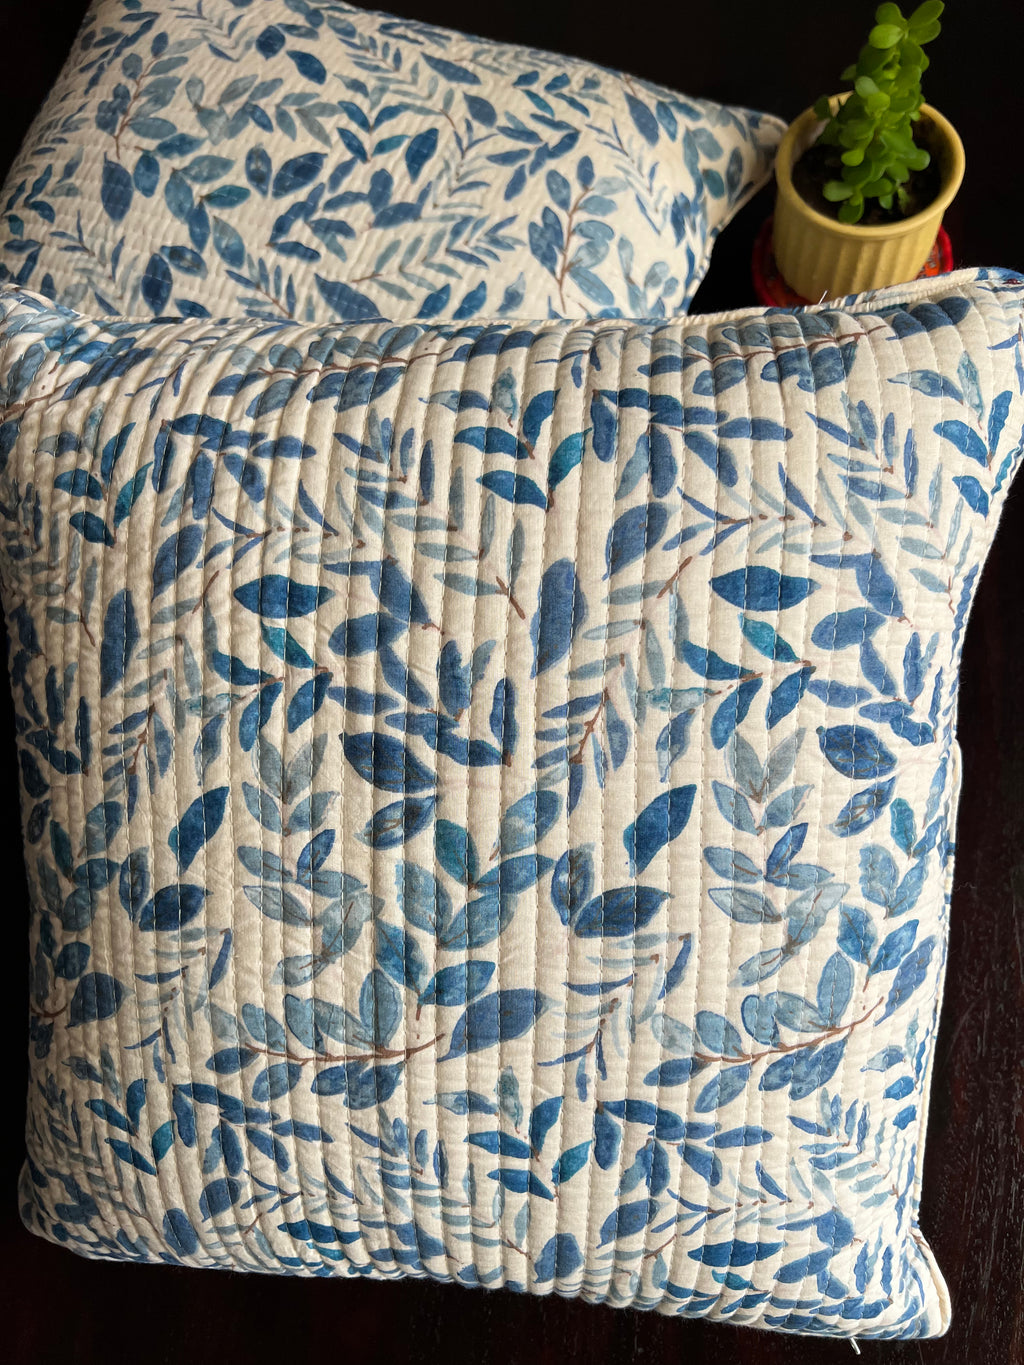 KANAK - SINGLE PIECE QUILTED 16 BY 16 INCHES CUSHION